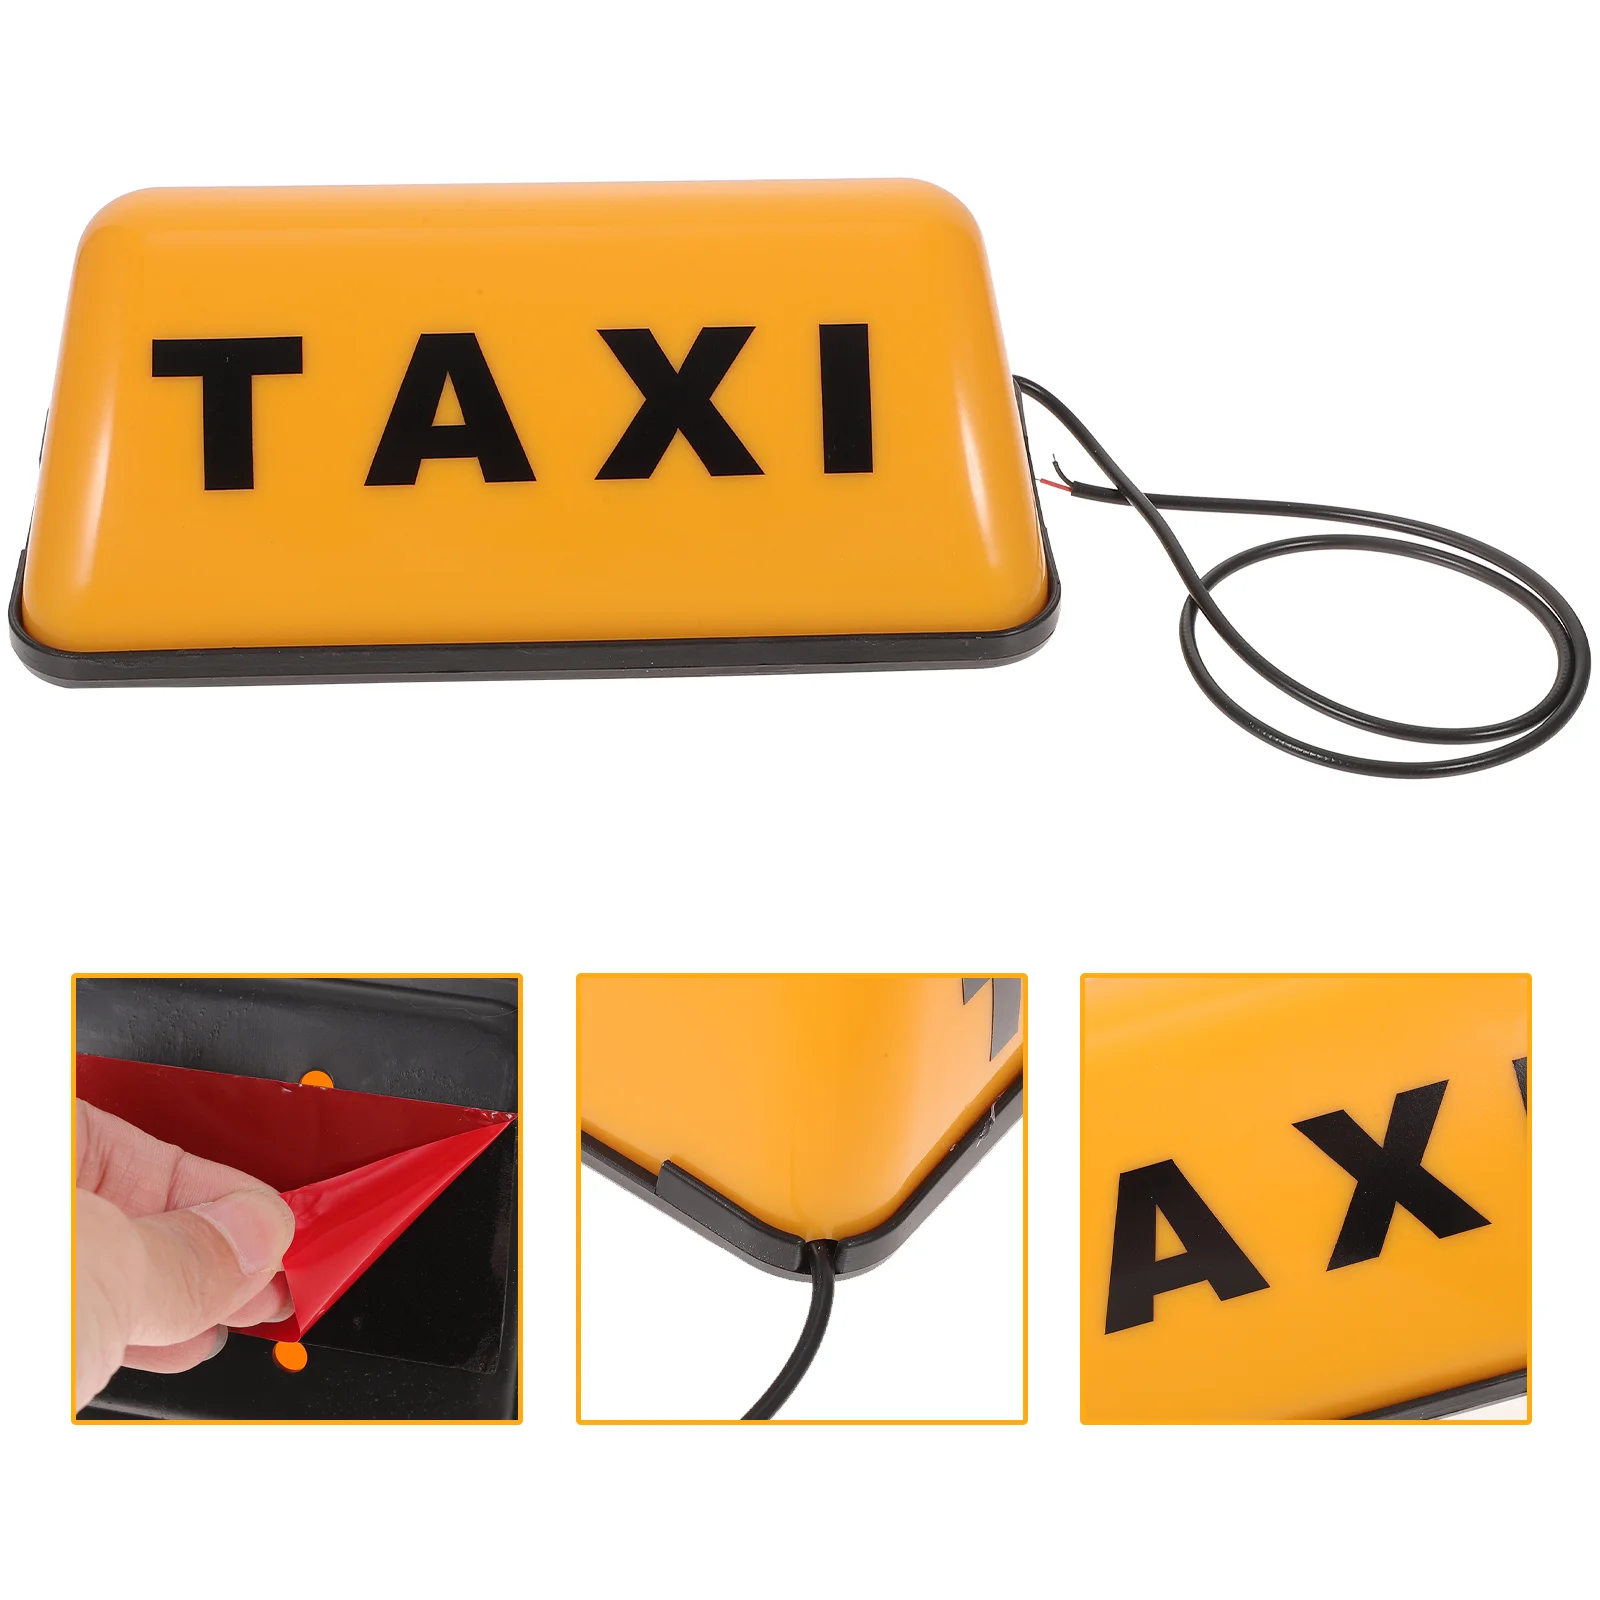 

Taxi Sign Light Car Roof Lamp Led Illuminated Lights Cab Indicator Topper Up Dome Delivery Share Super Bright Toppers